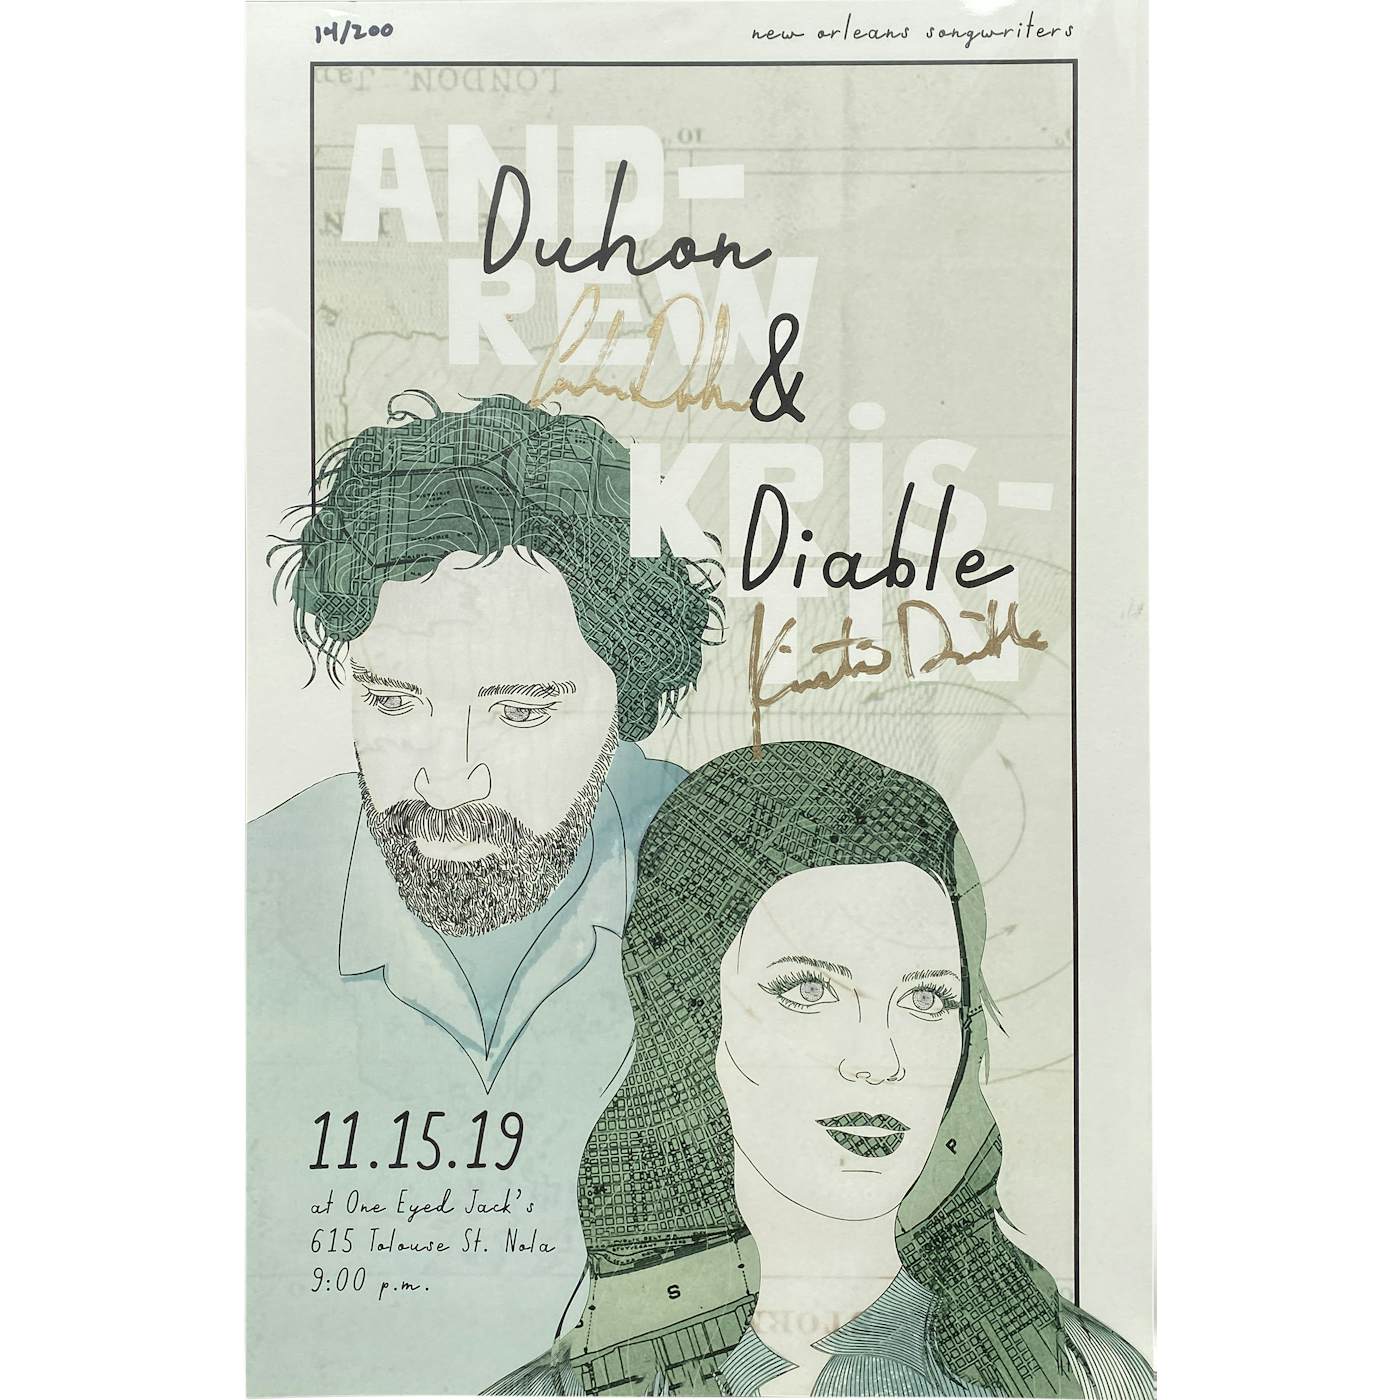 Andrew Duhon Signed One Eyed Jack's with Kristin Diable Show Poster - 11/15/19